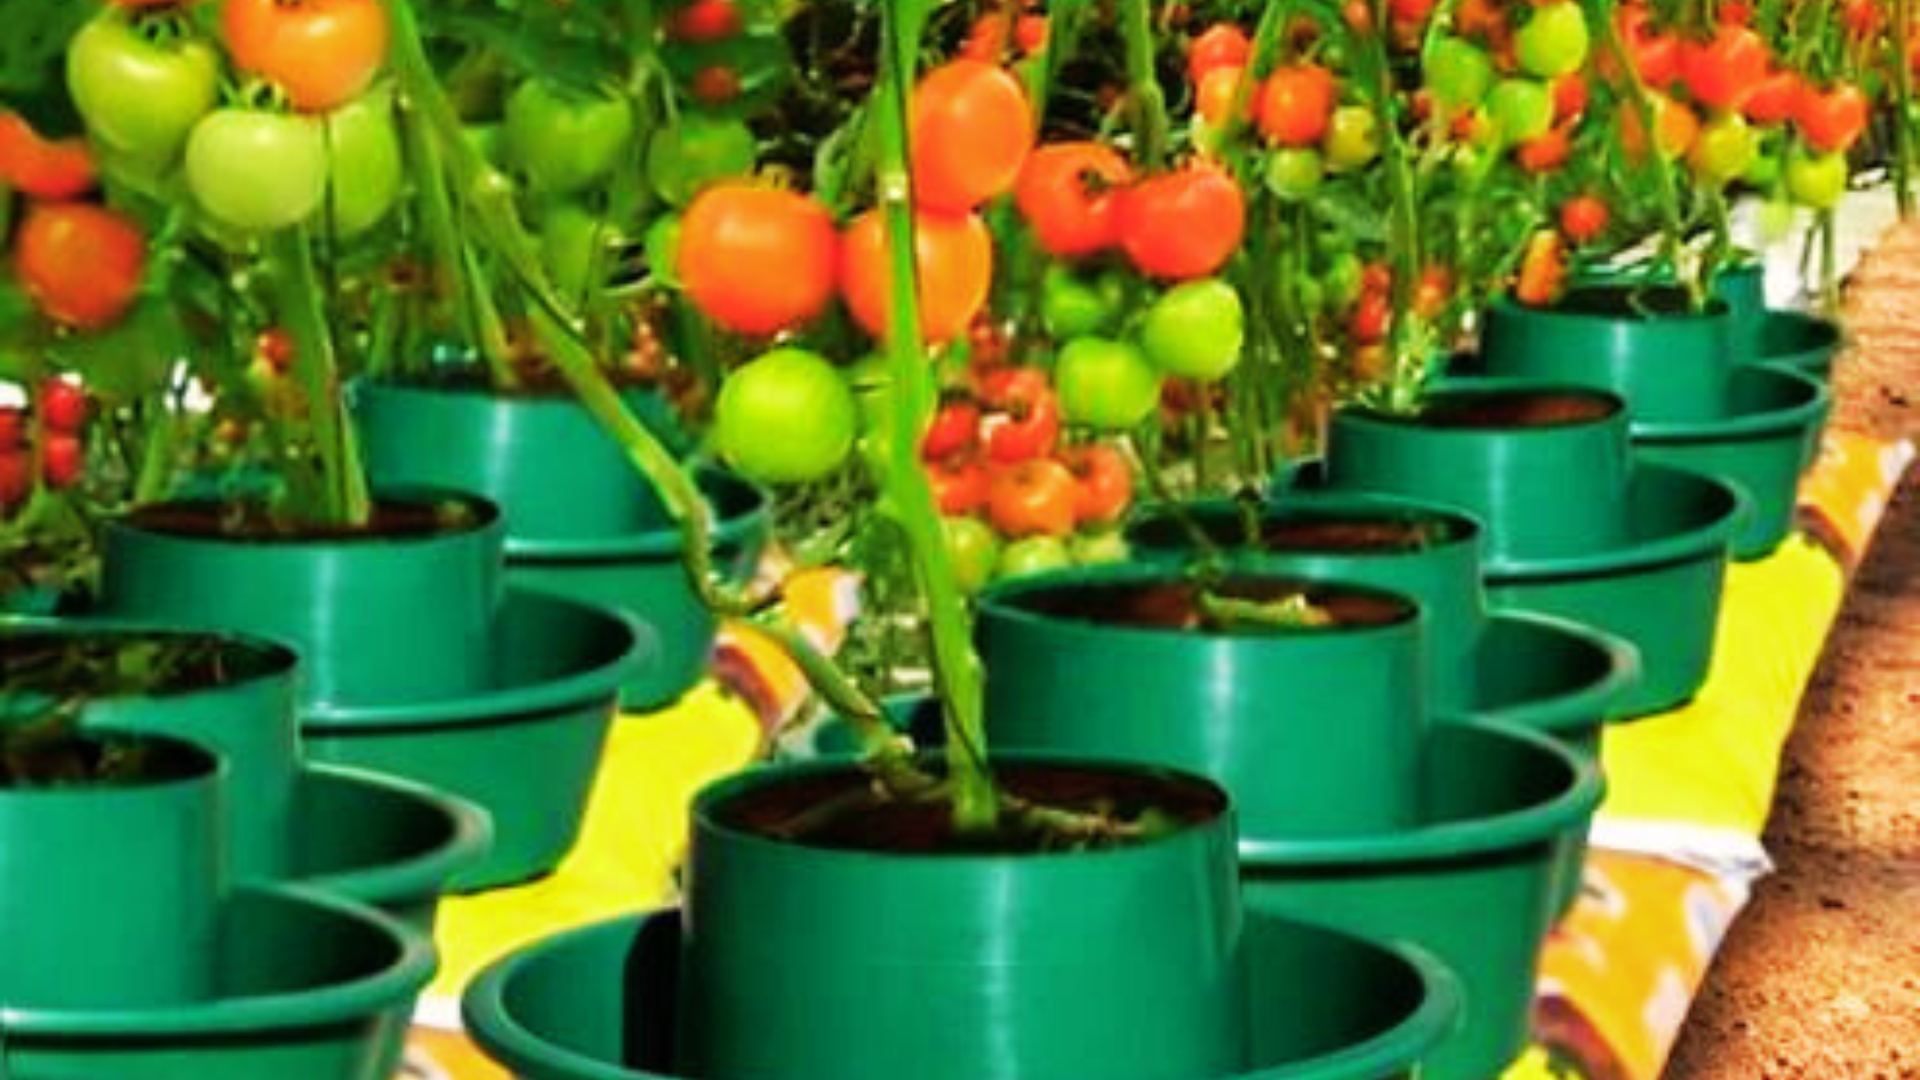 How To Grow Tomatoes From Seeds